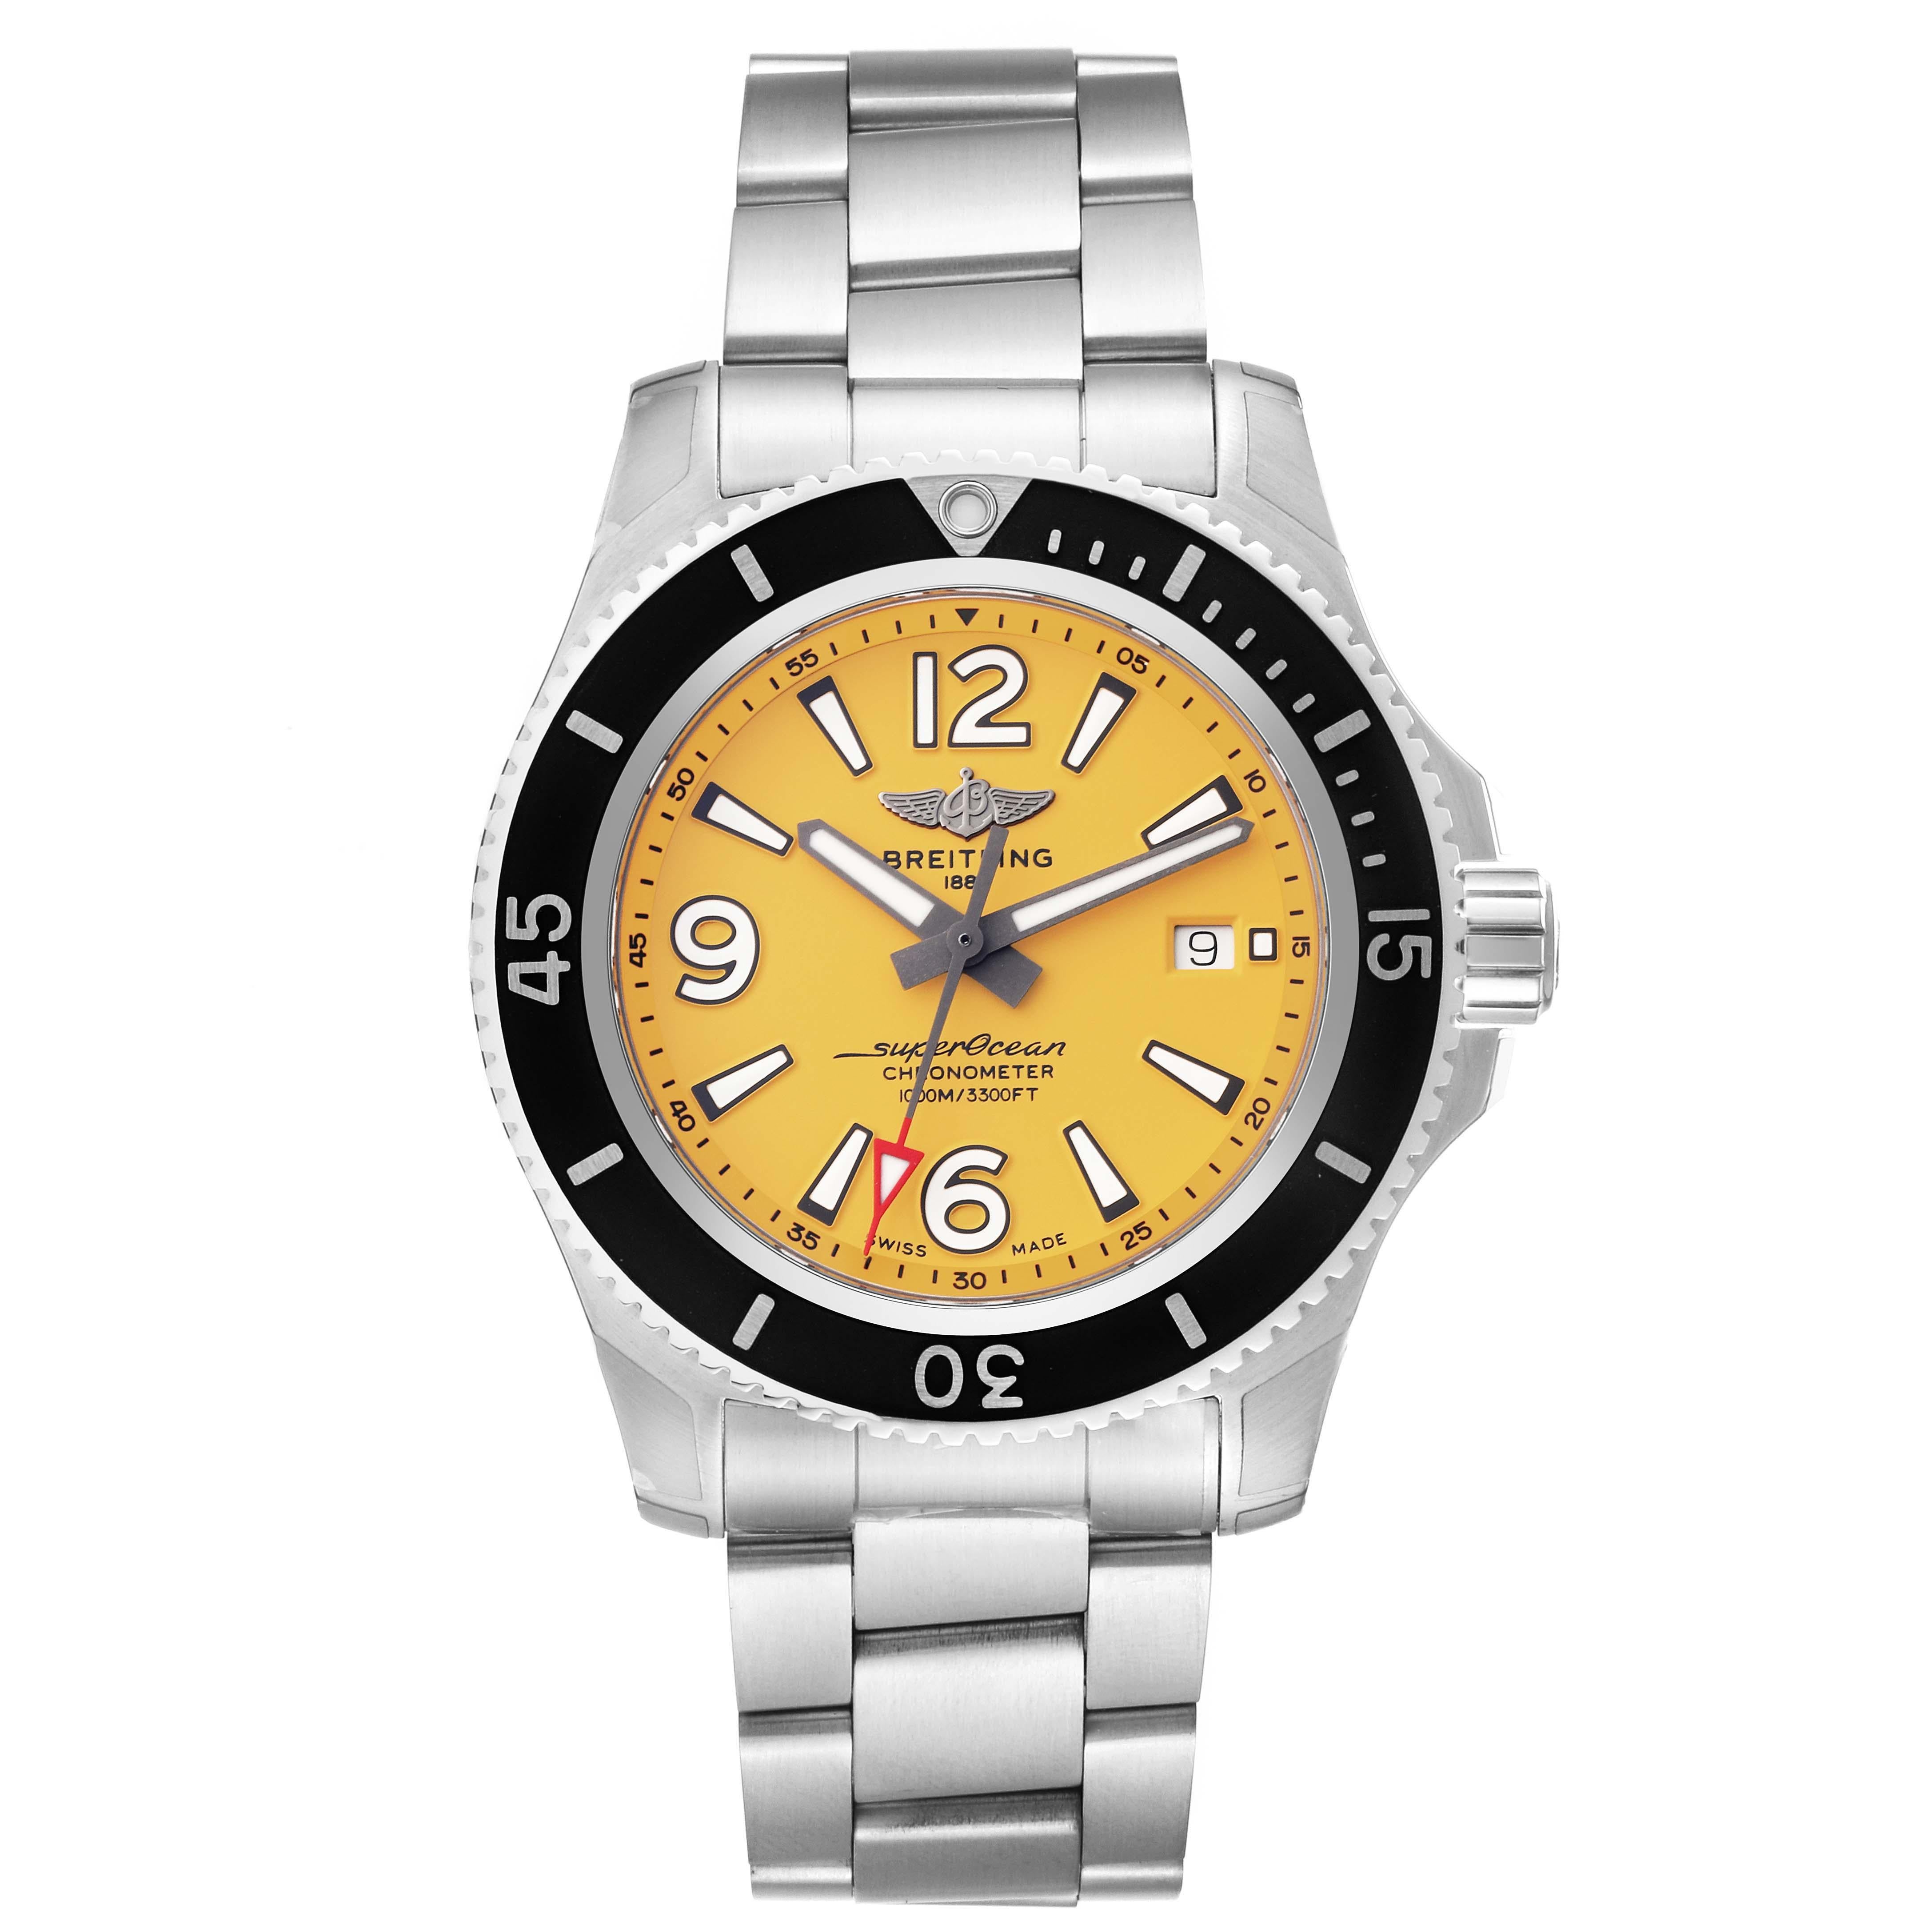 Breitling Superocean II Yellow Dial Steel Mens Watch A17367 Unworn. Authomatic self-winding movement. Stainless steel case 44 mm in diameter. Stainless steel screwed-down crown and pushers. Black unidirectional rotating bezel. 0-60 elapsed-time.